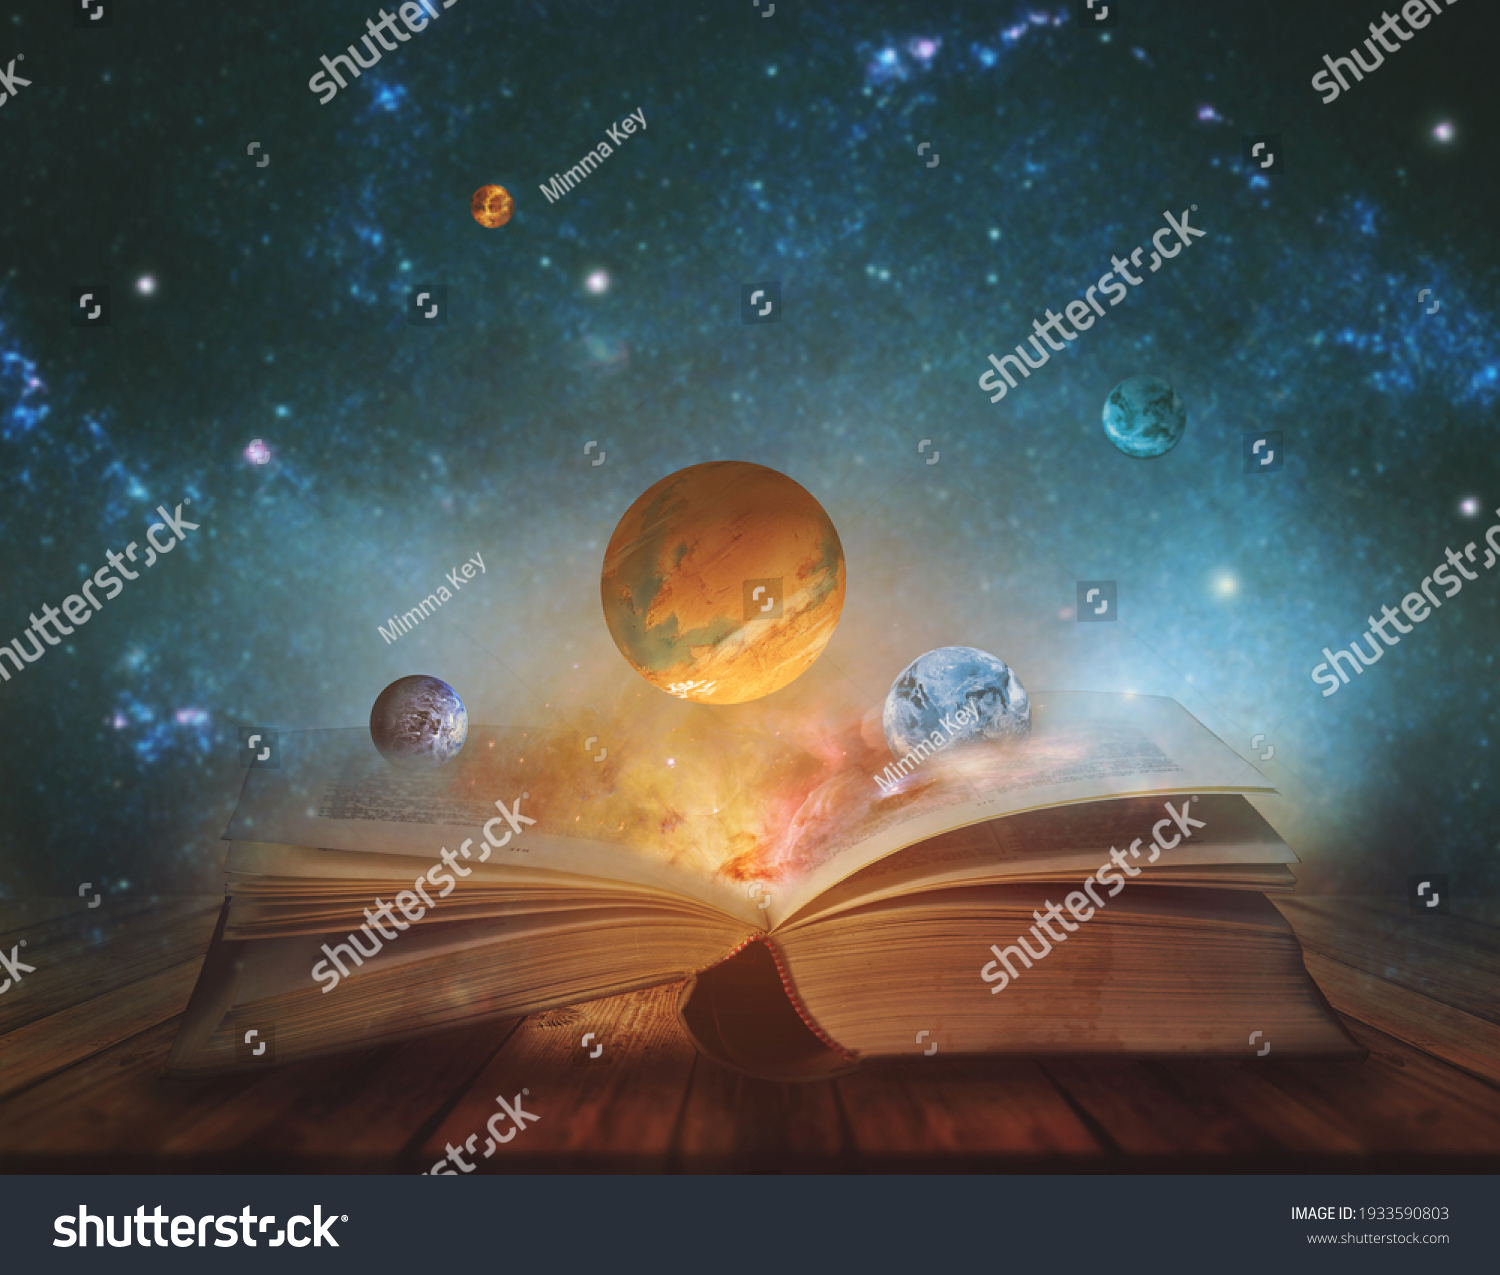 Book of the universe - opened magic book with planets and galaxies. Elements of this image furnished by NASA #1933590803